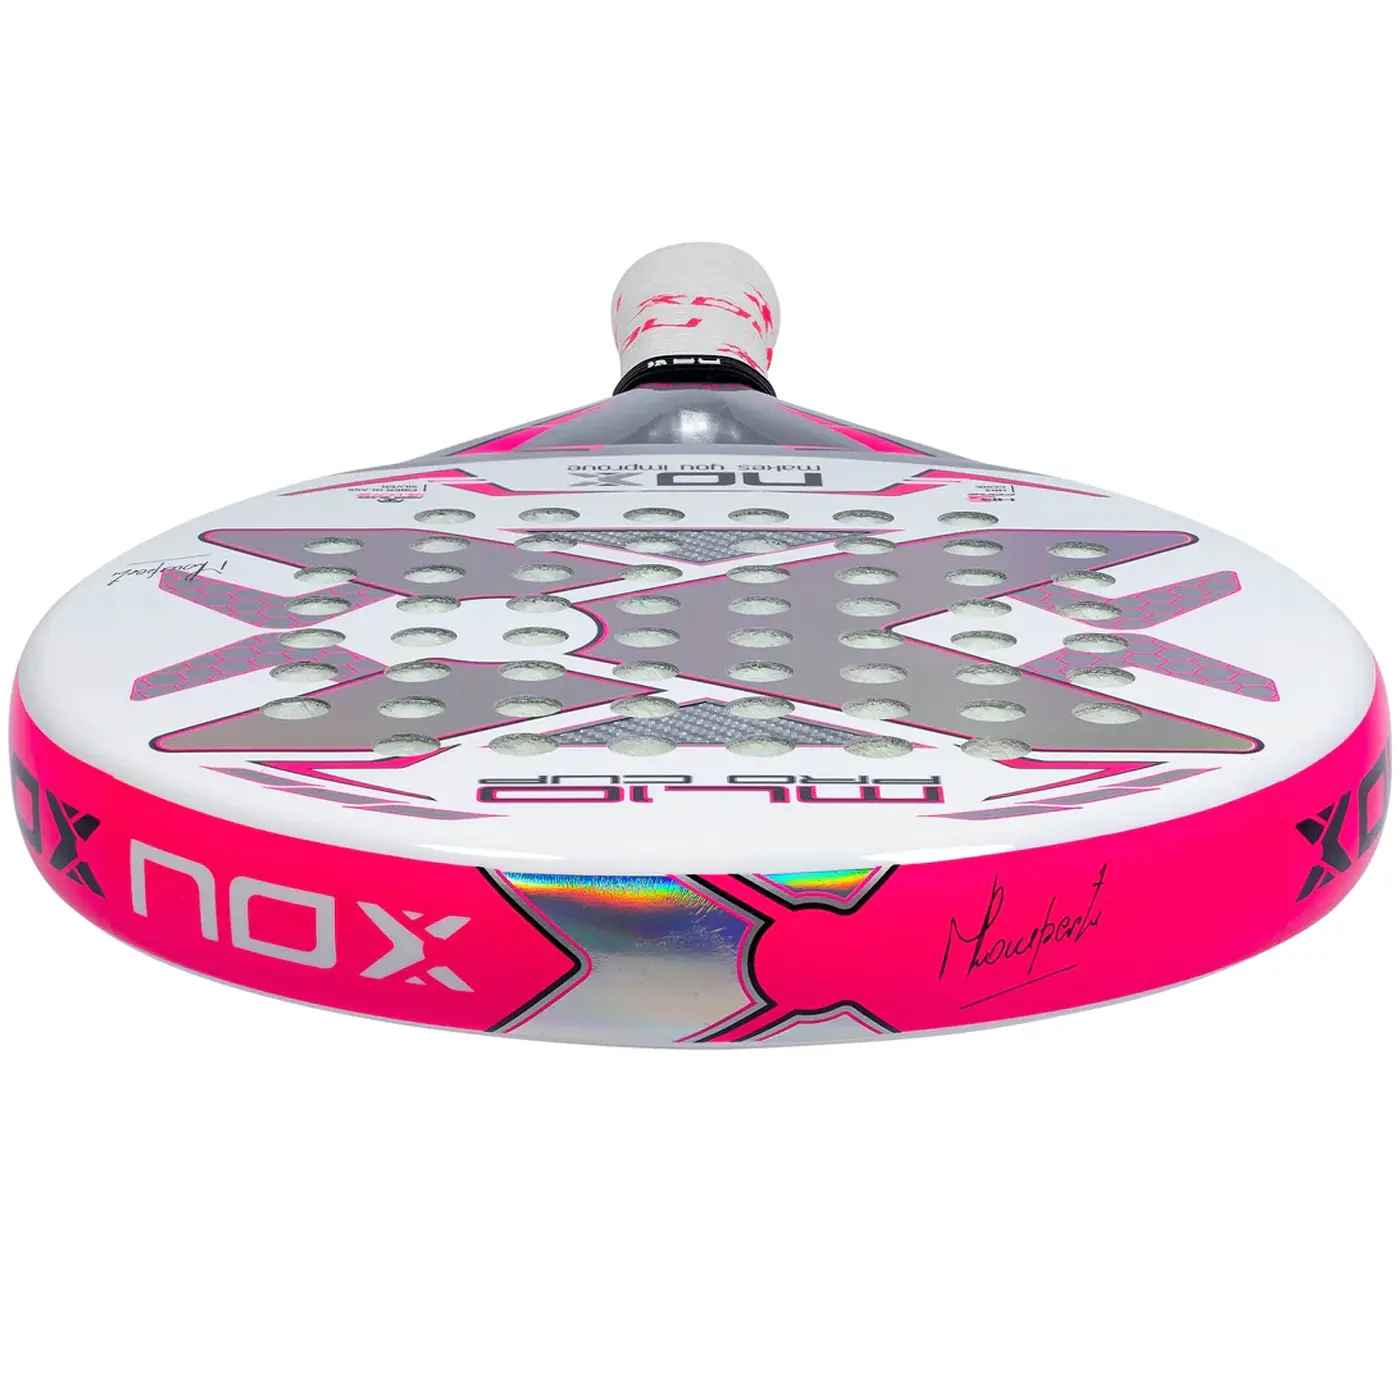 NOX ML10 PRO CUP Silver Padel Racket, racket with cover bag Image 4